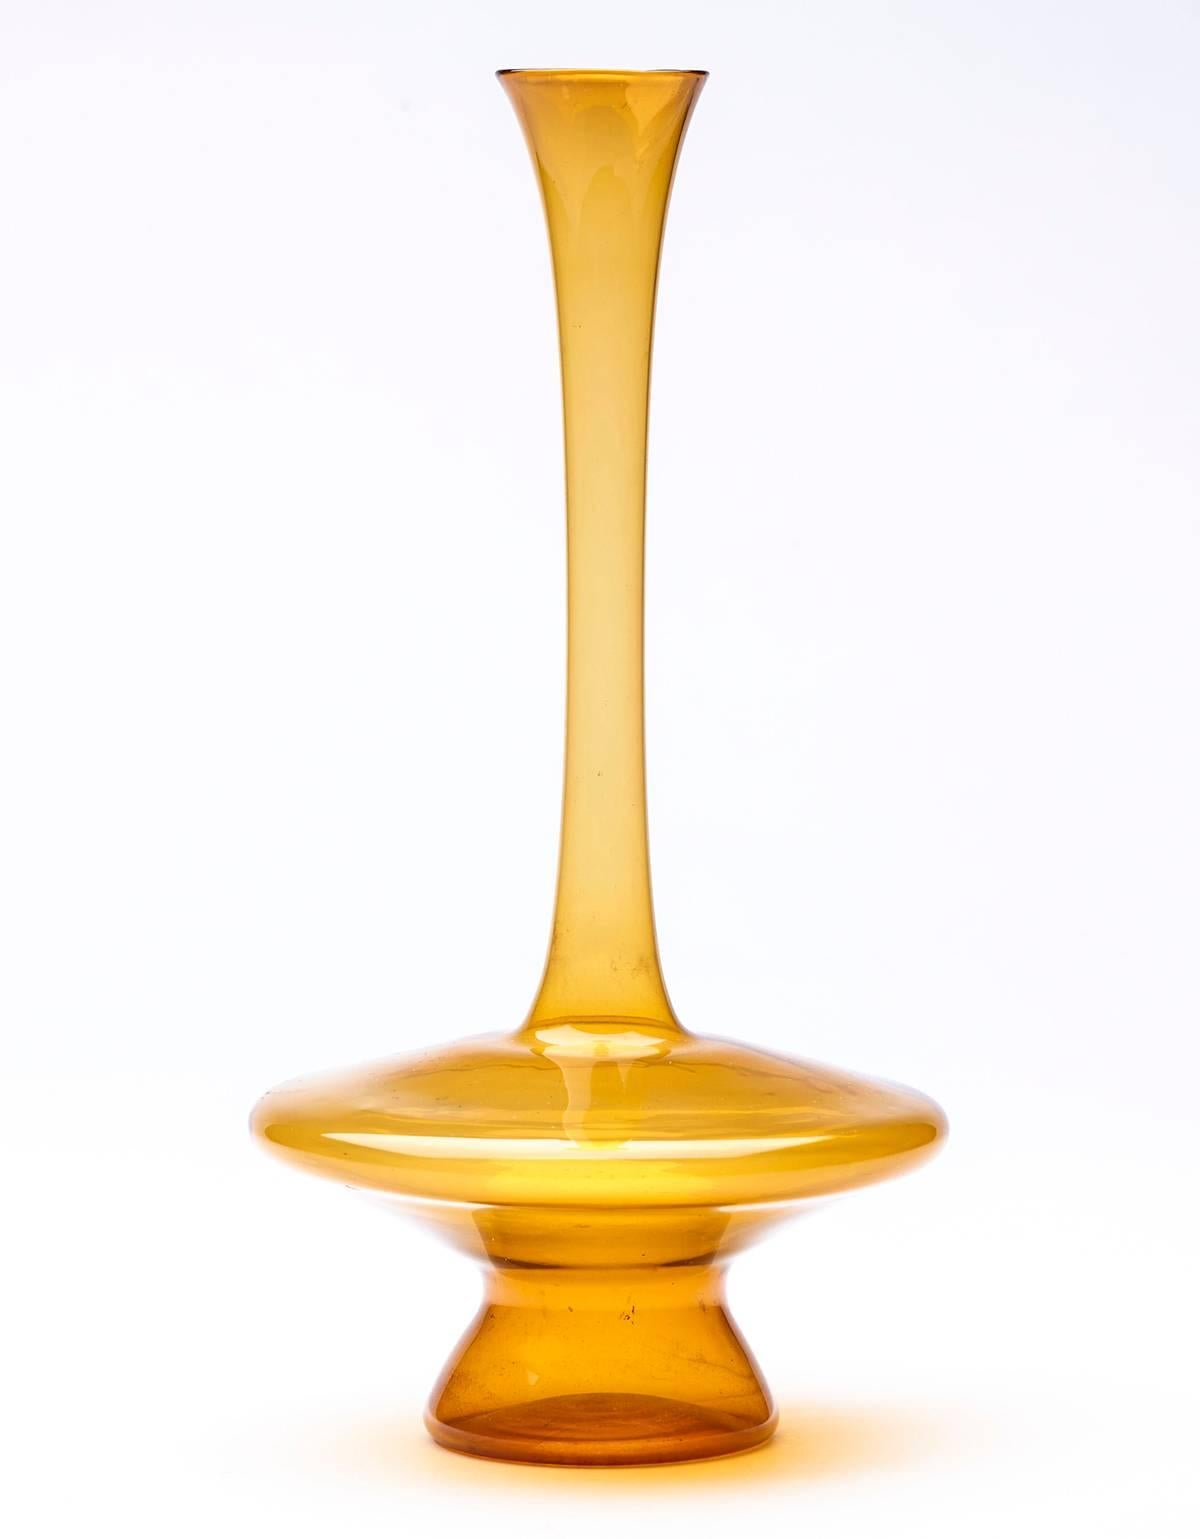 A stunning vintage Murano Soffiati (light blown) solifleur amber glass vase with a squat rounded body on a hollow blown shaped foot with a tall slender neck with a small trumpet shaped top. The vase is not marked. 

These light blown or Soffiati